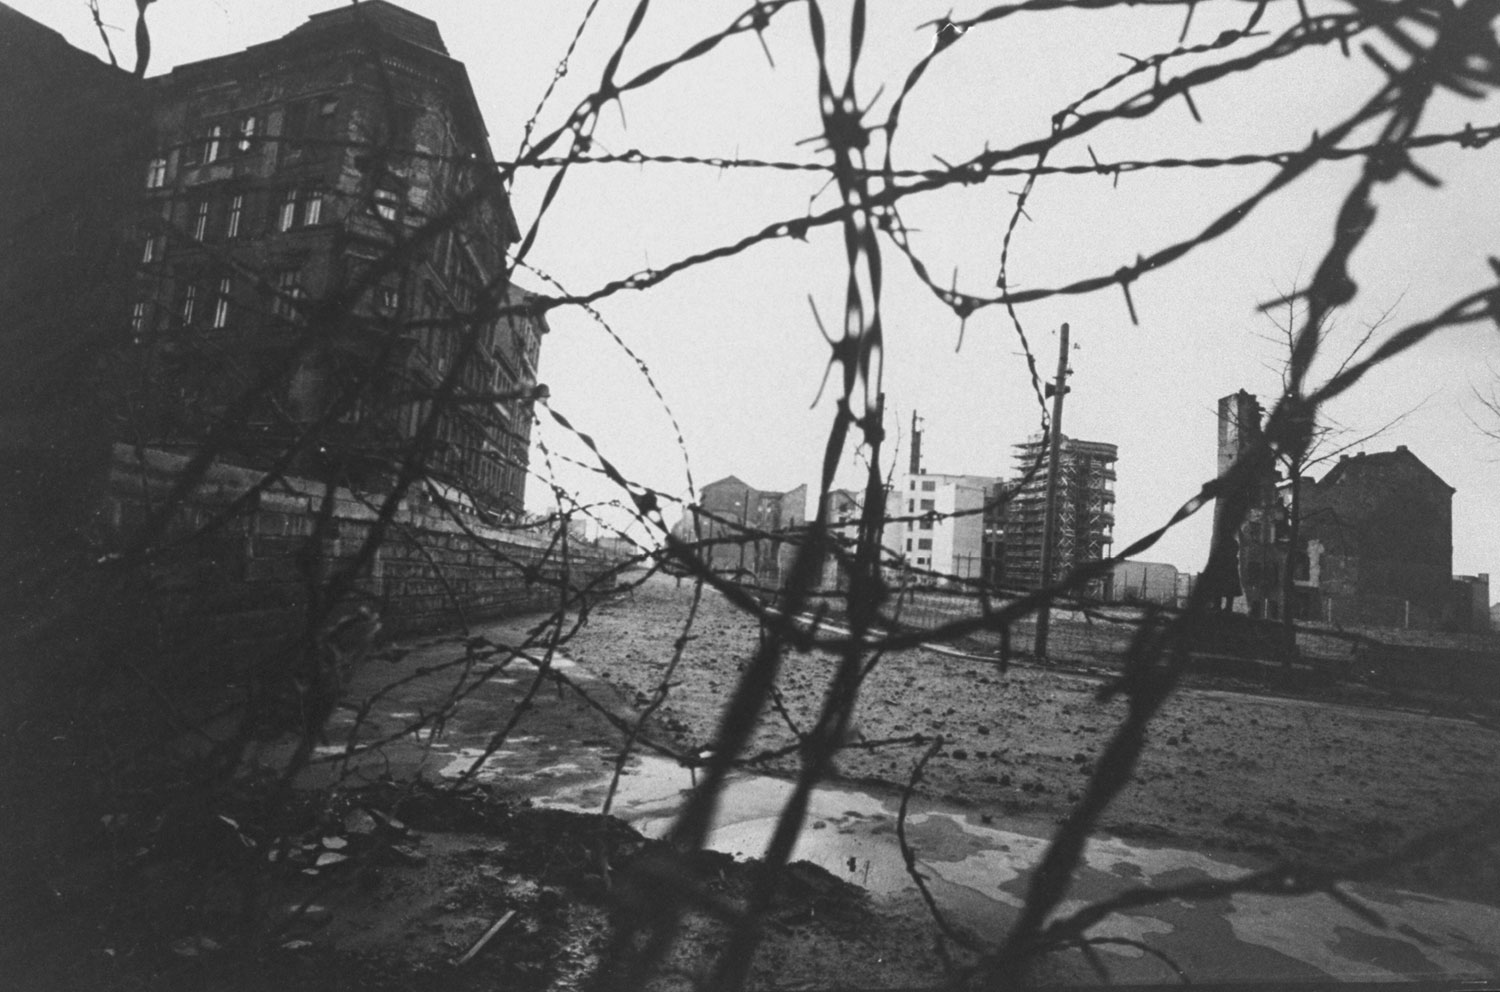 A divided Berlin is seen through a tangle of barbed wire.